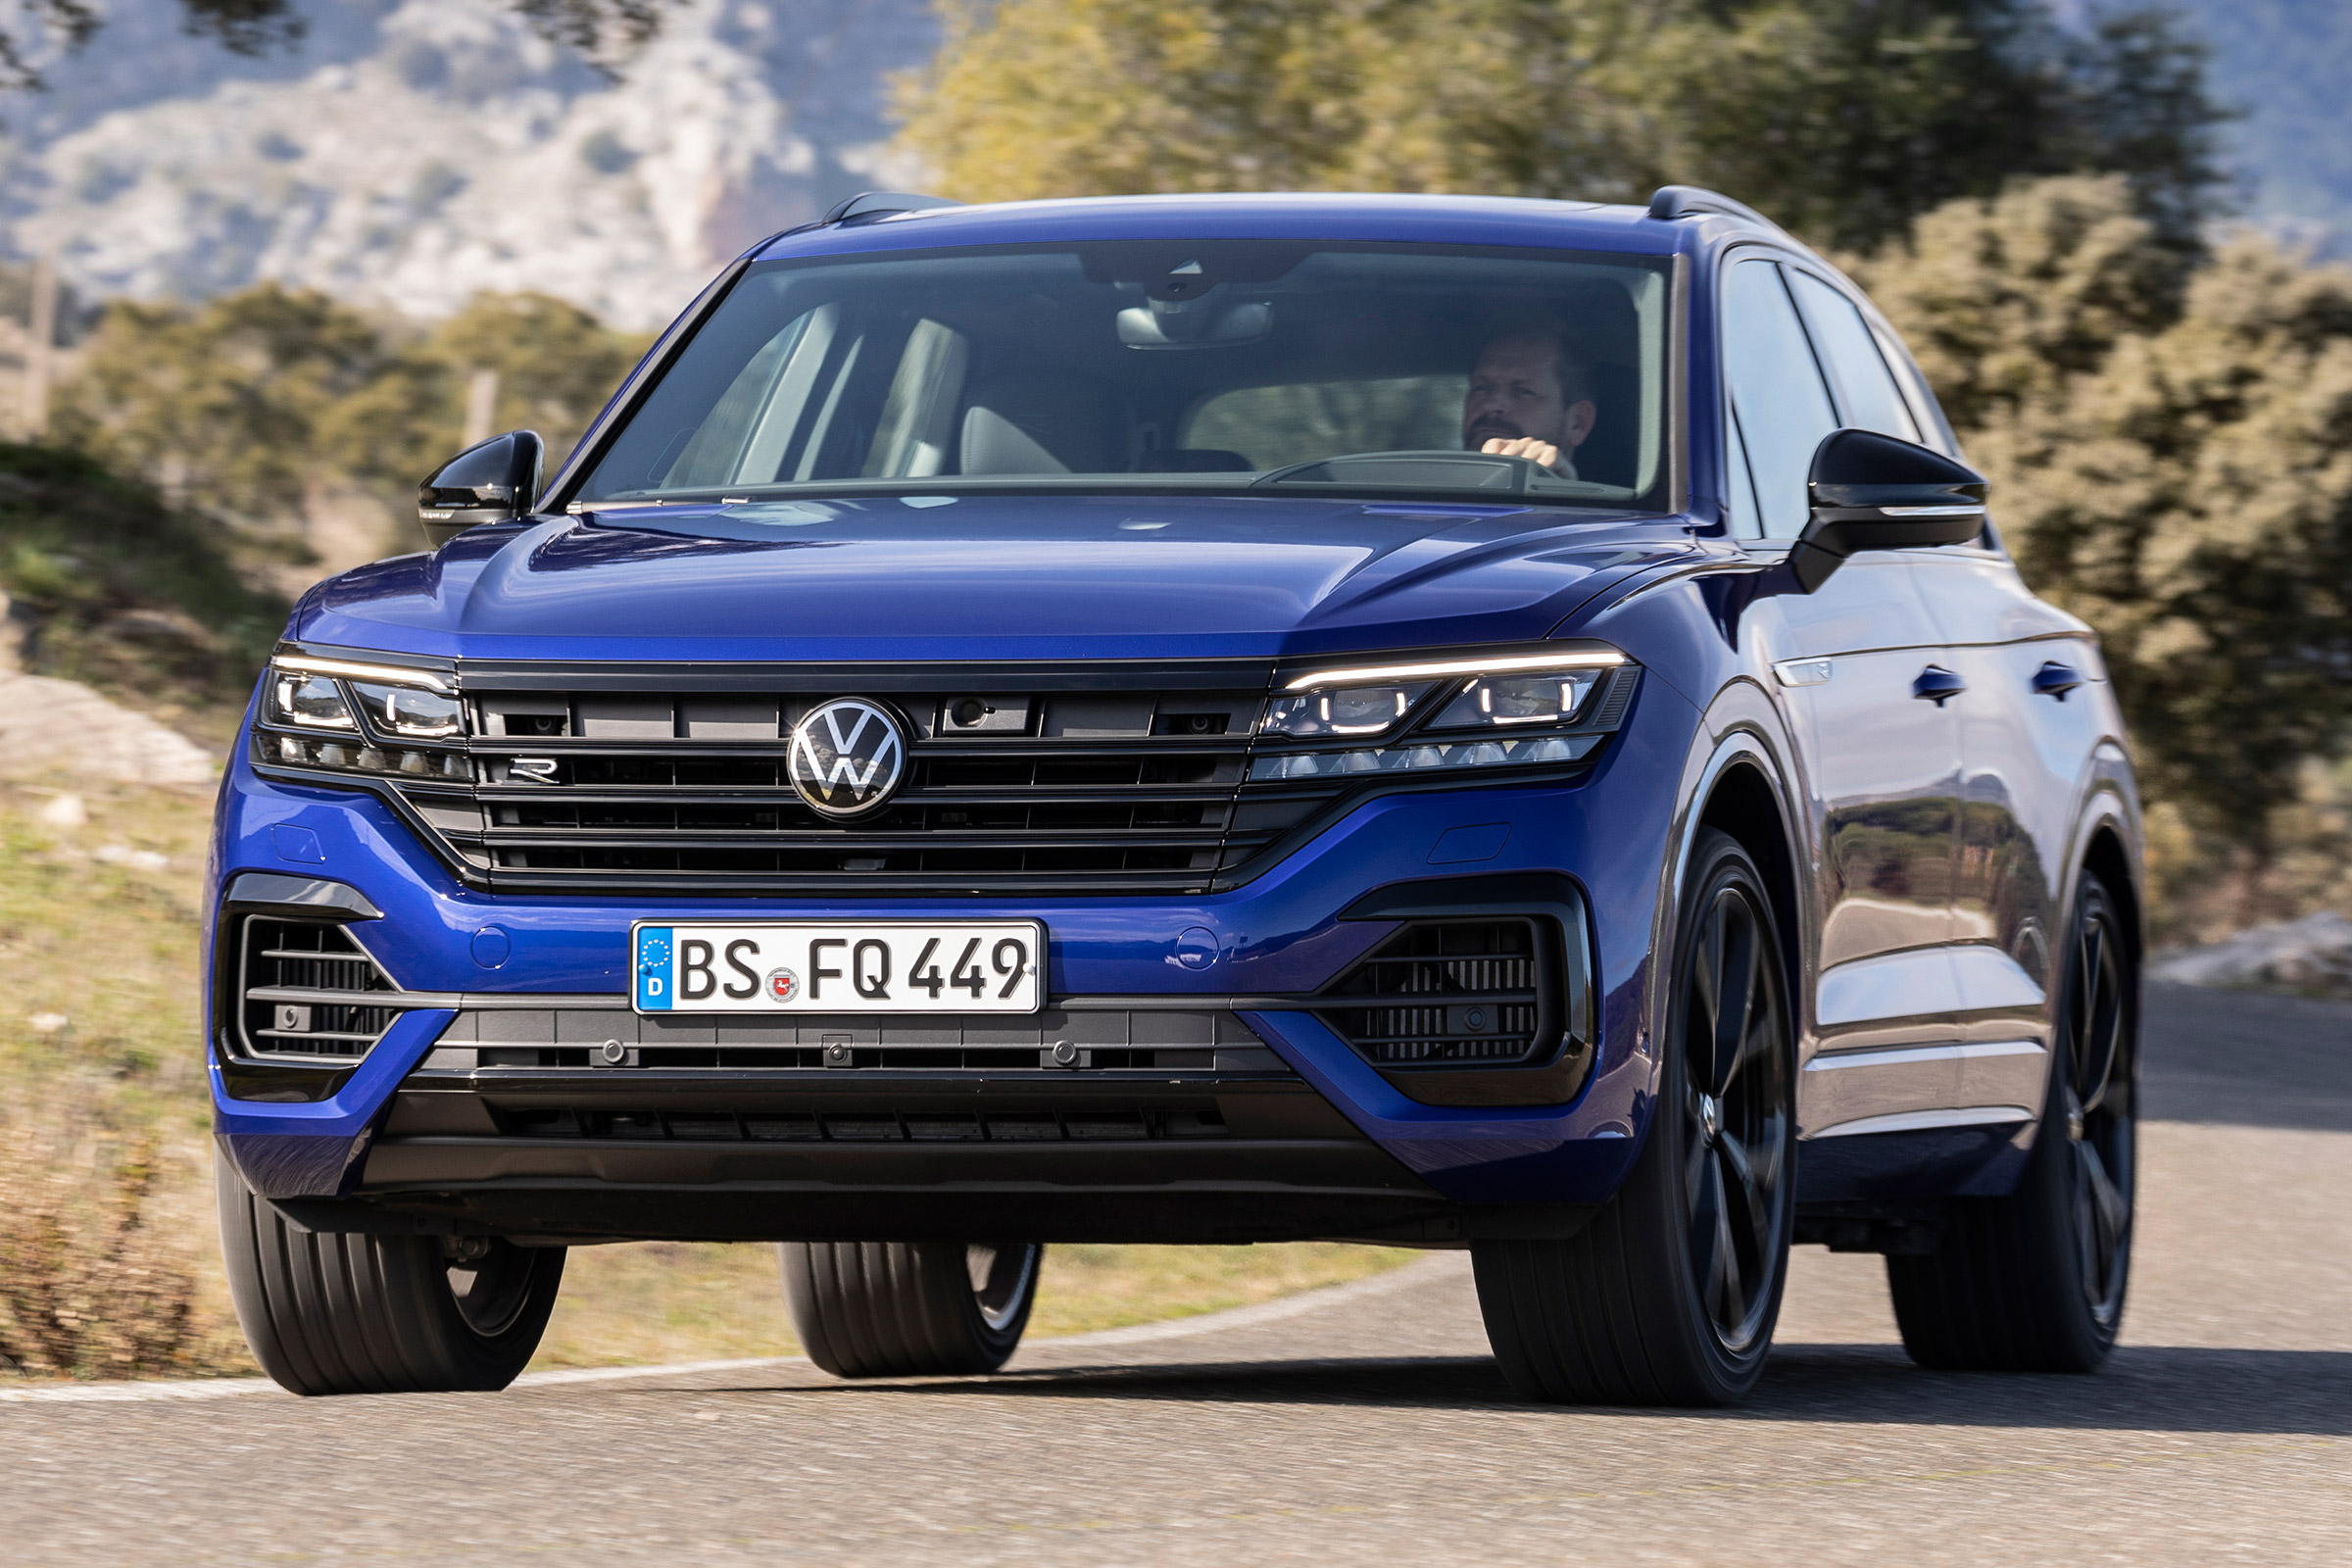 New 2020 VW Touareg R revealed with plug-in power and 